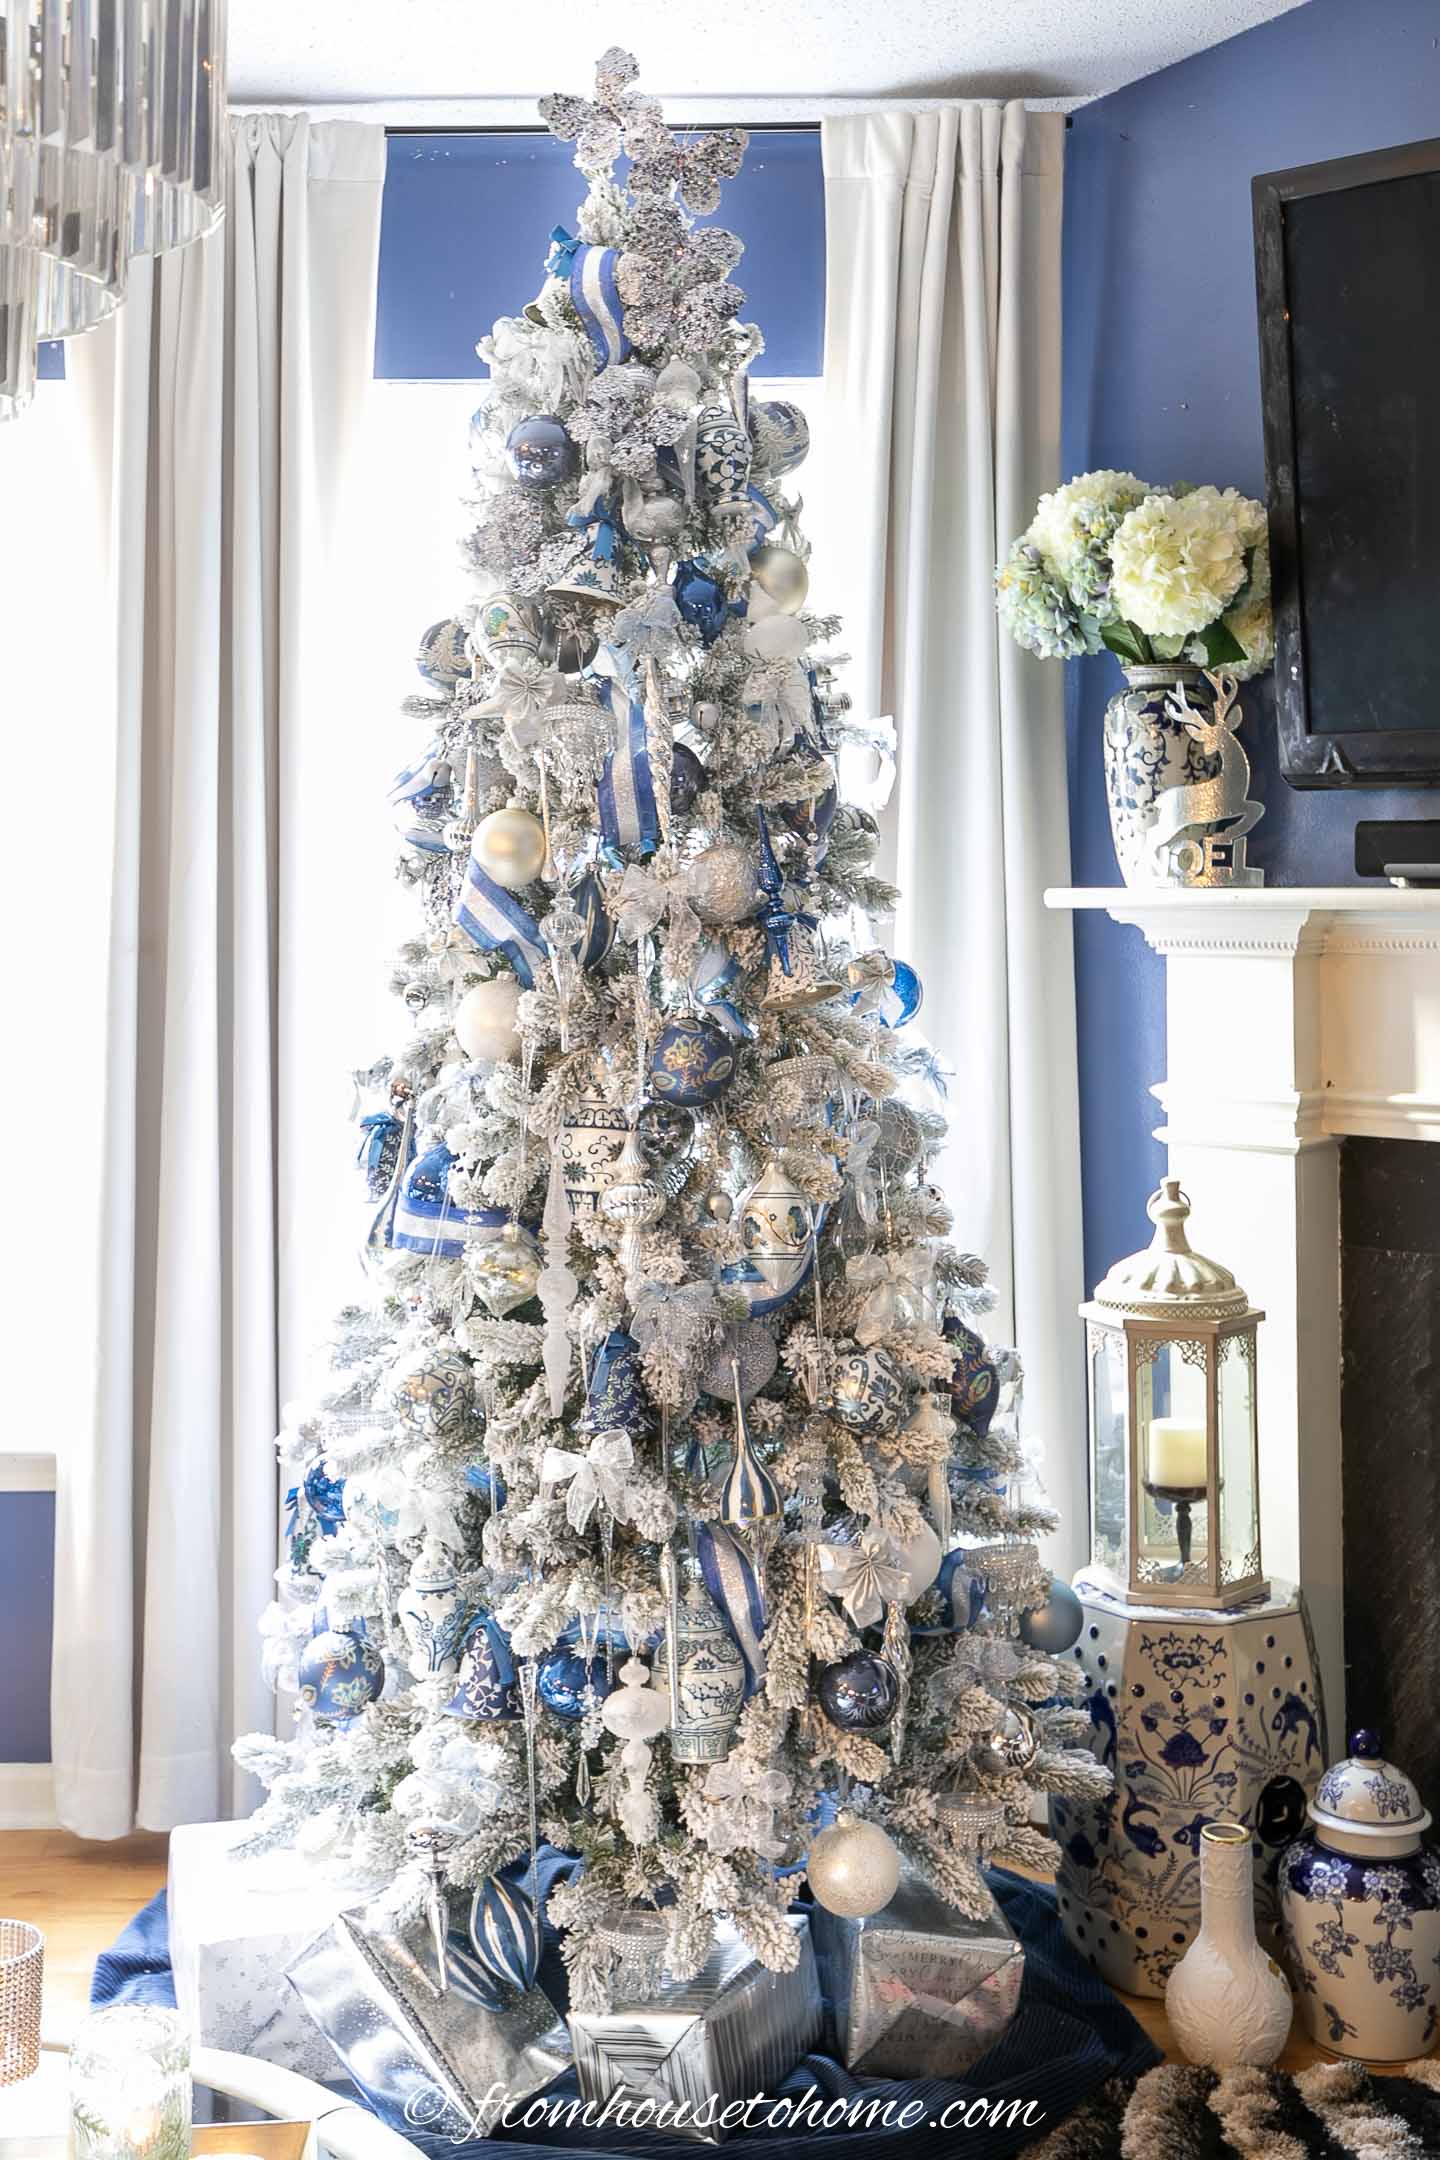 Wintry white, blue and silver Christmas tree in front of the window